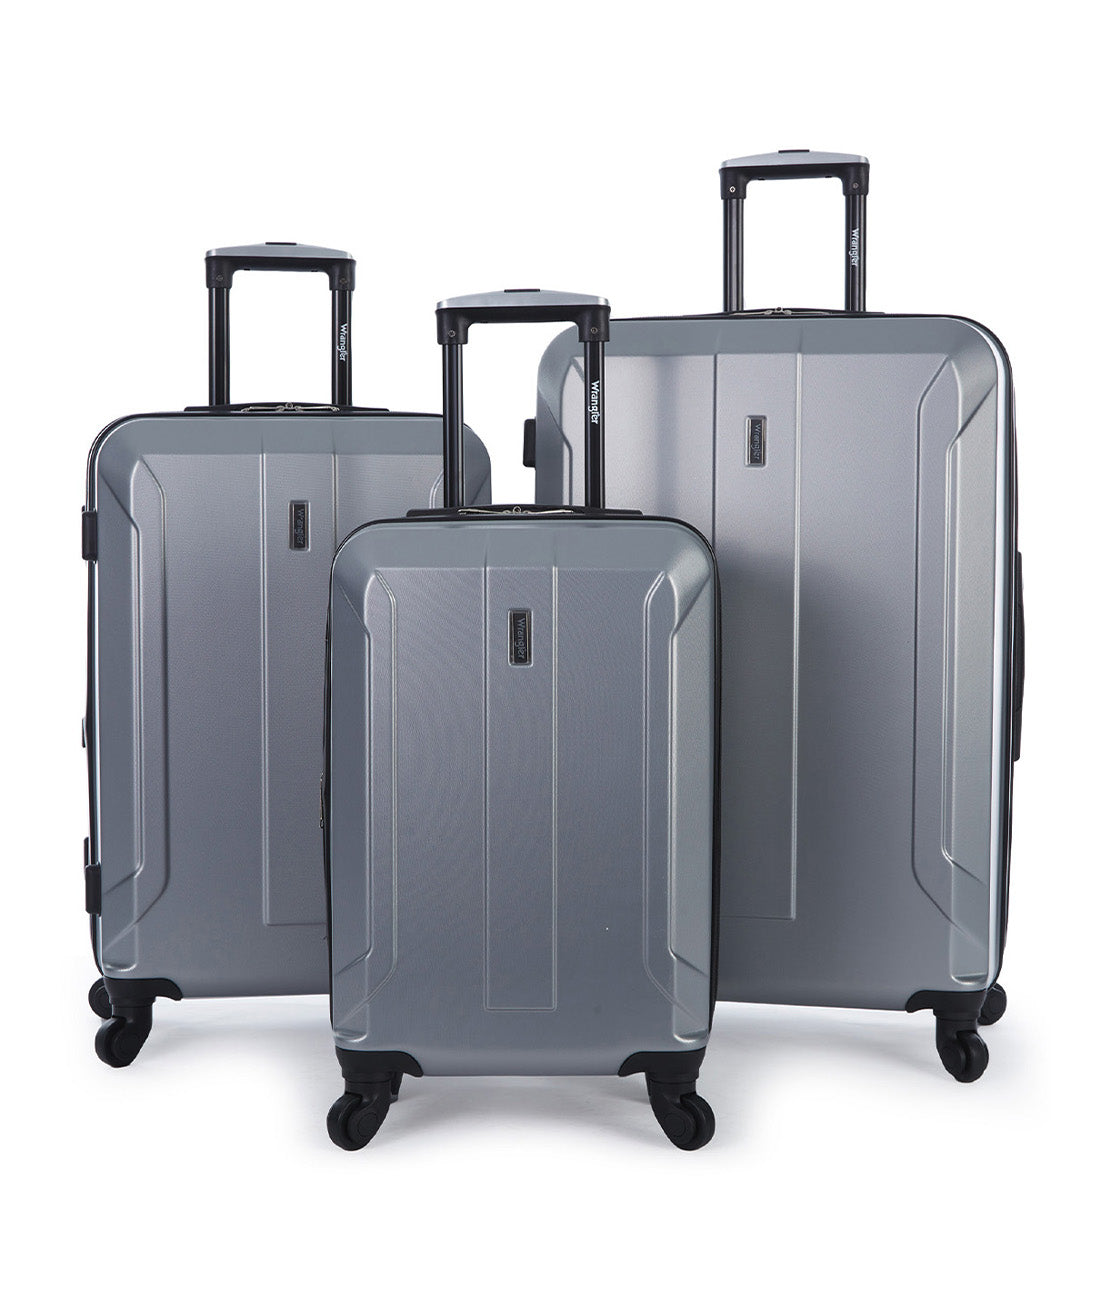 Wrangler® | Walkersville Collection | 3PC Luggage set